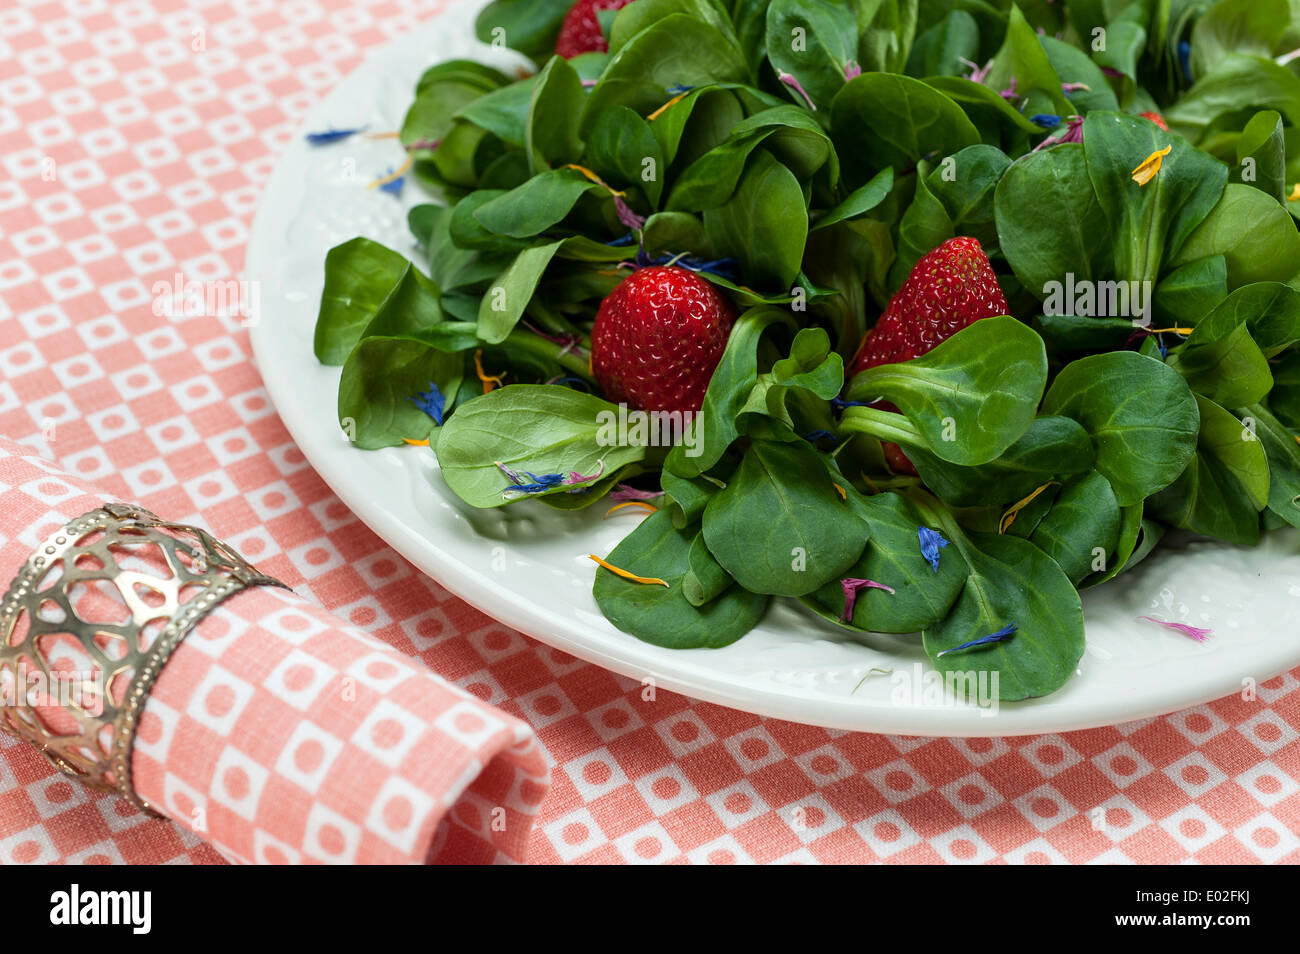 Lamb's lettuce with strawberries and flower petals served on a plate, napkin Stock Photo